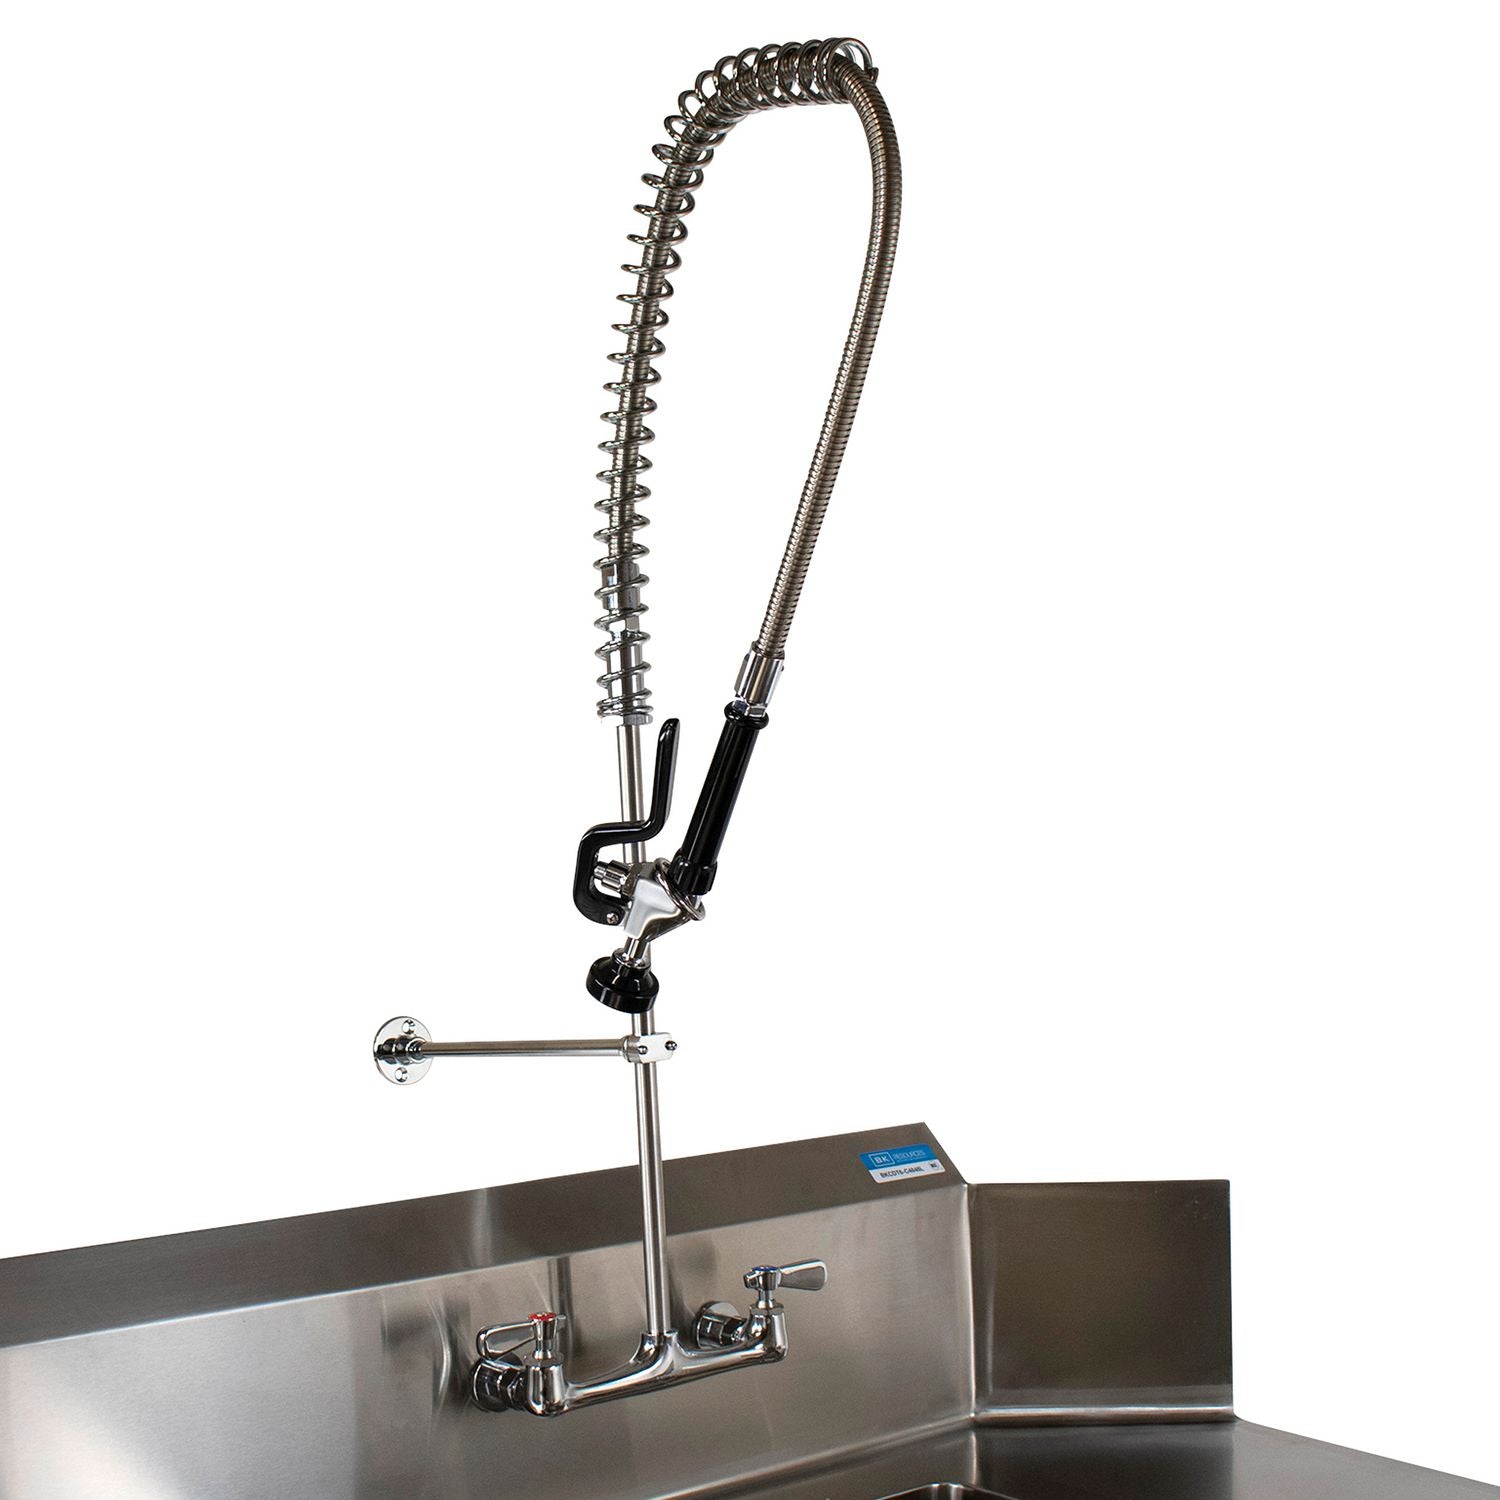 workforce-prerinse-add-a-faucet-8-height-chrome-ships-in-4-6-business-days_bkebkfvsmprwbm - 1